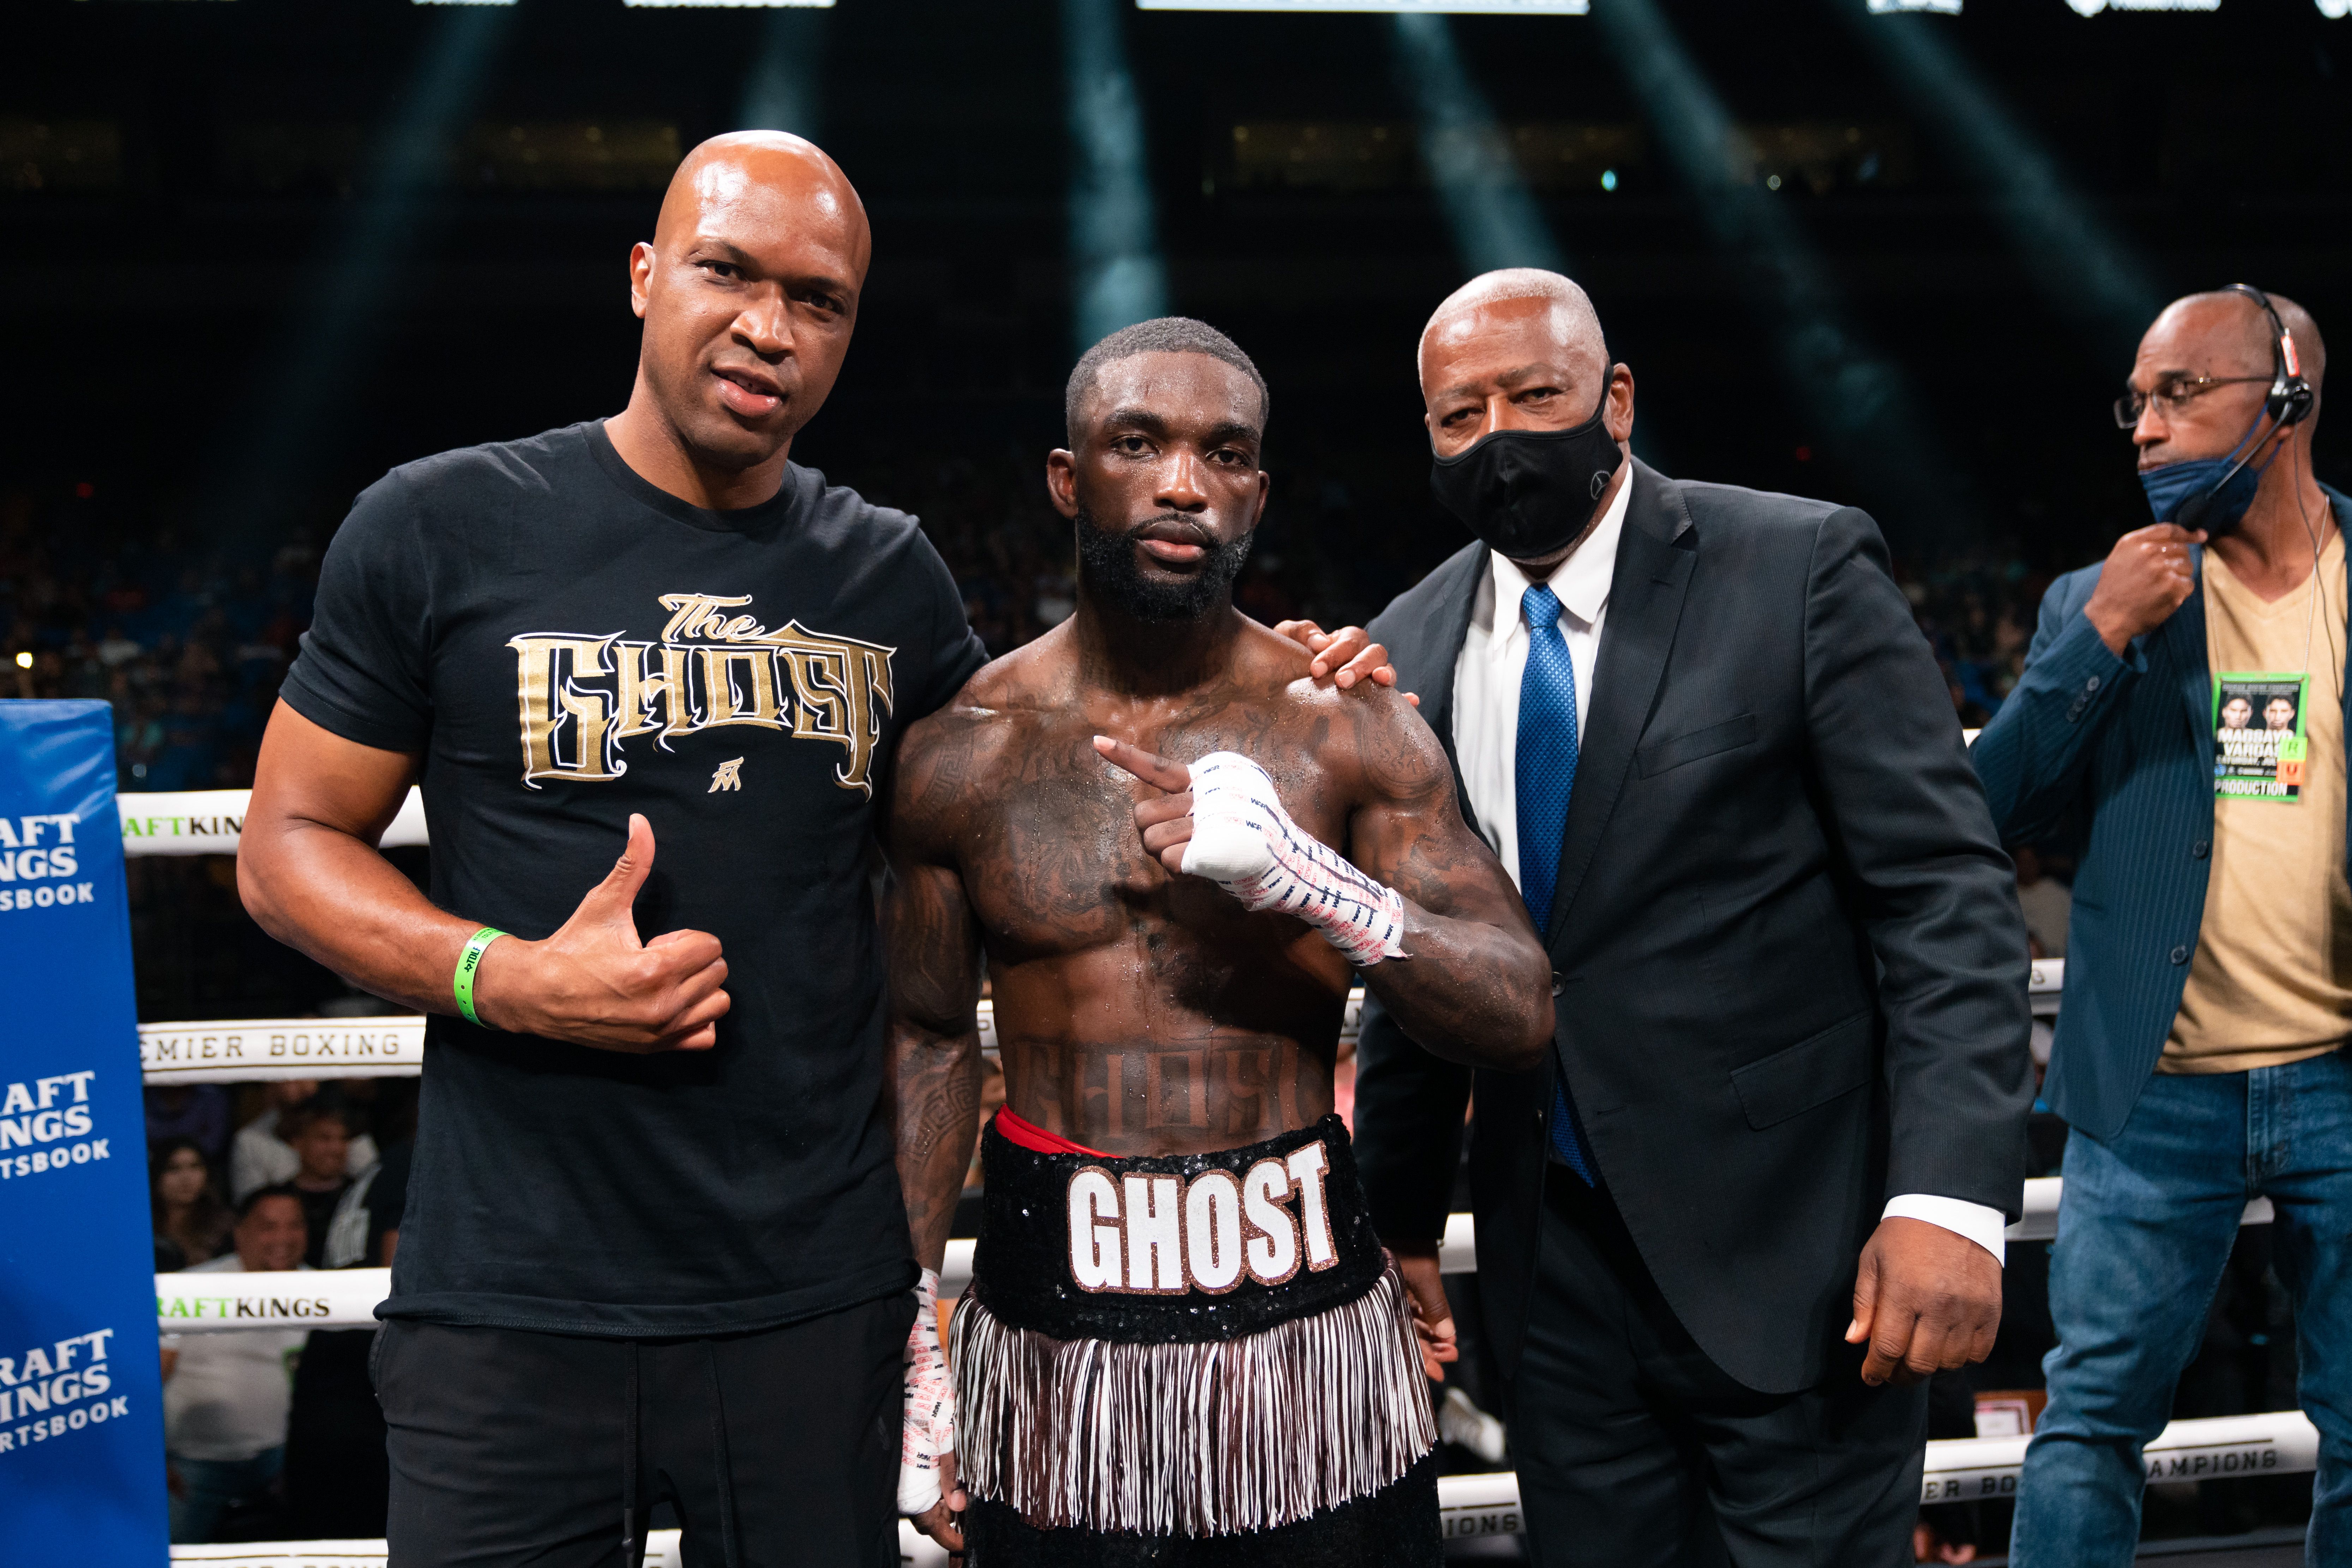 Frank 'The Ghost' Martin wants to scare Michel Rivera and the 135-pound division into submission